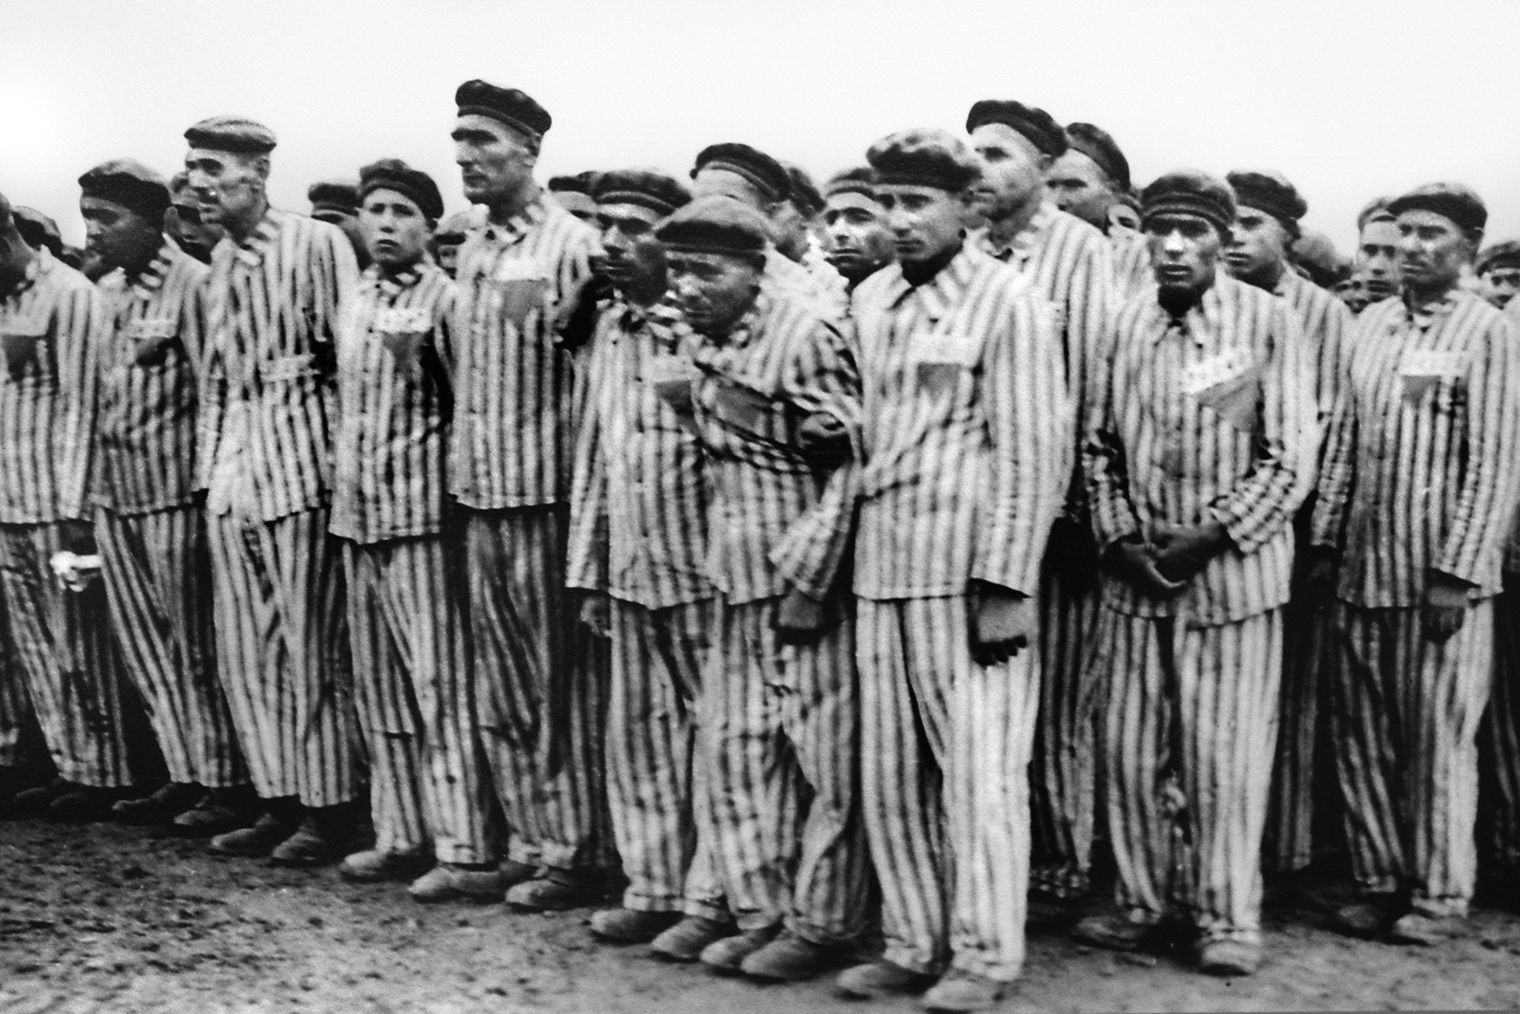 Concentration camp inmates lined up for a work detail wear identifying colored triangles on their prison uniforms. The triangles were used as a means of identifying each inmate’s category of prisoner.